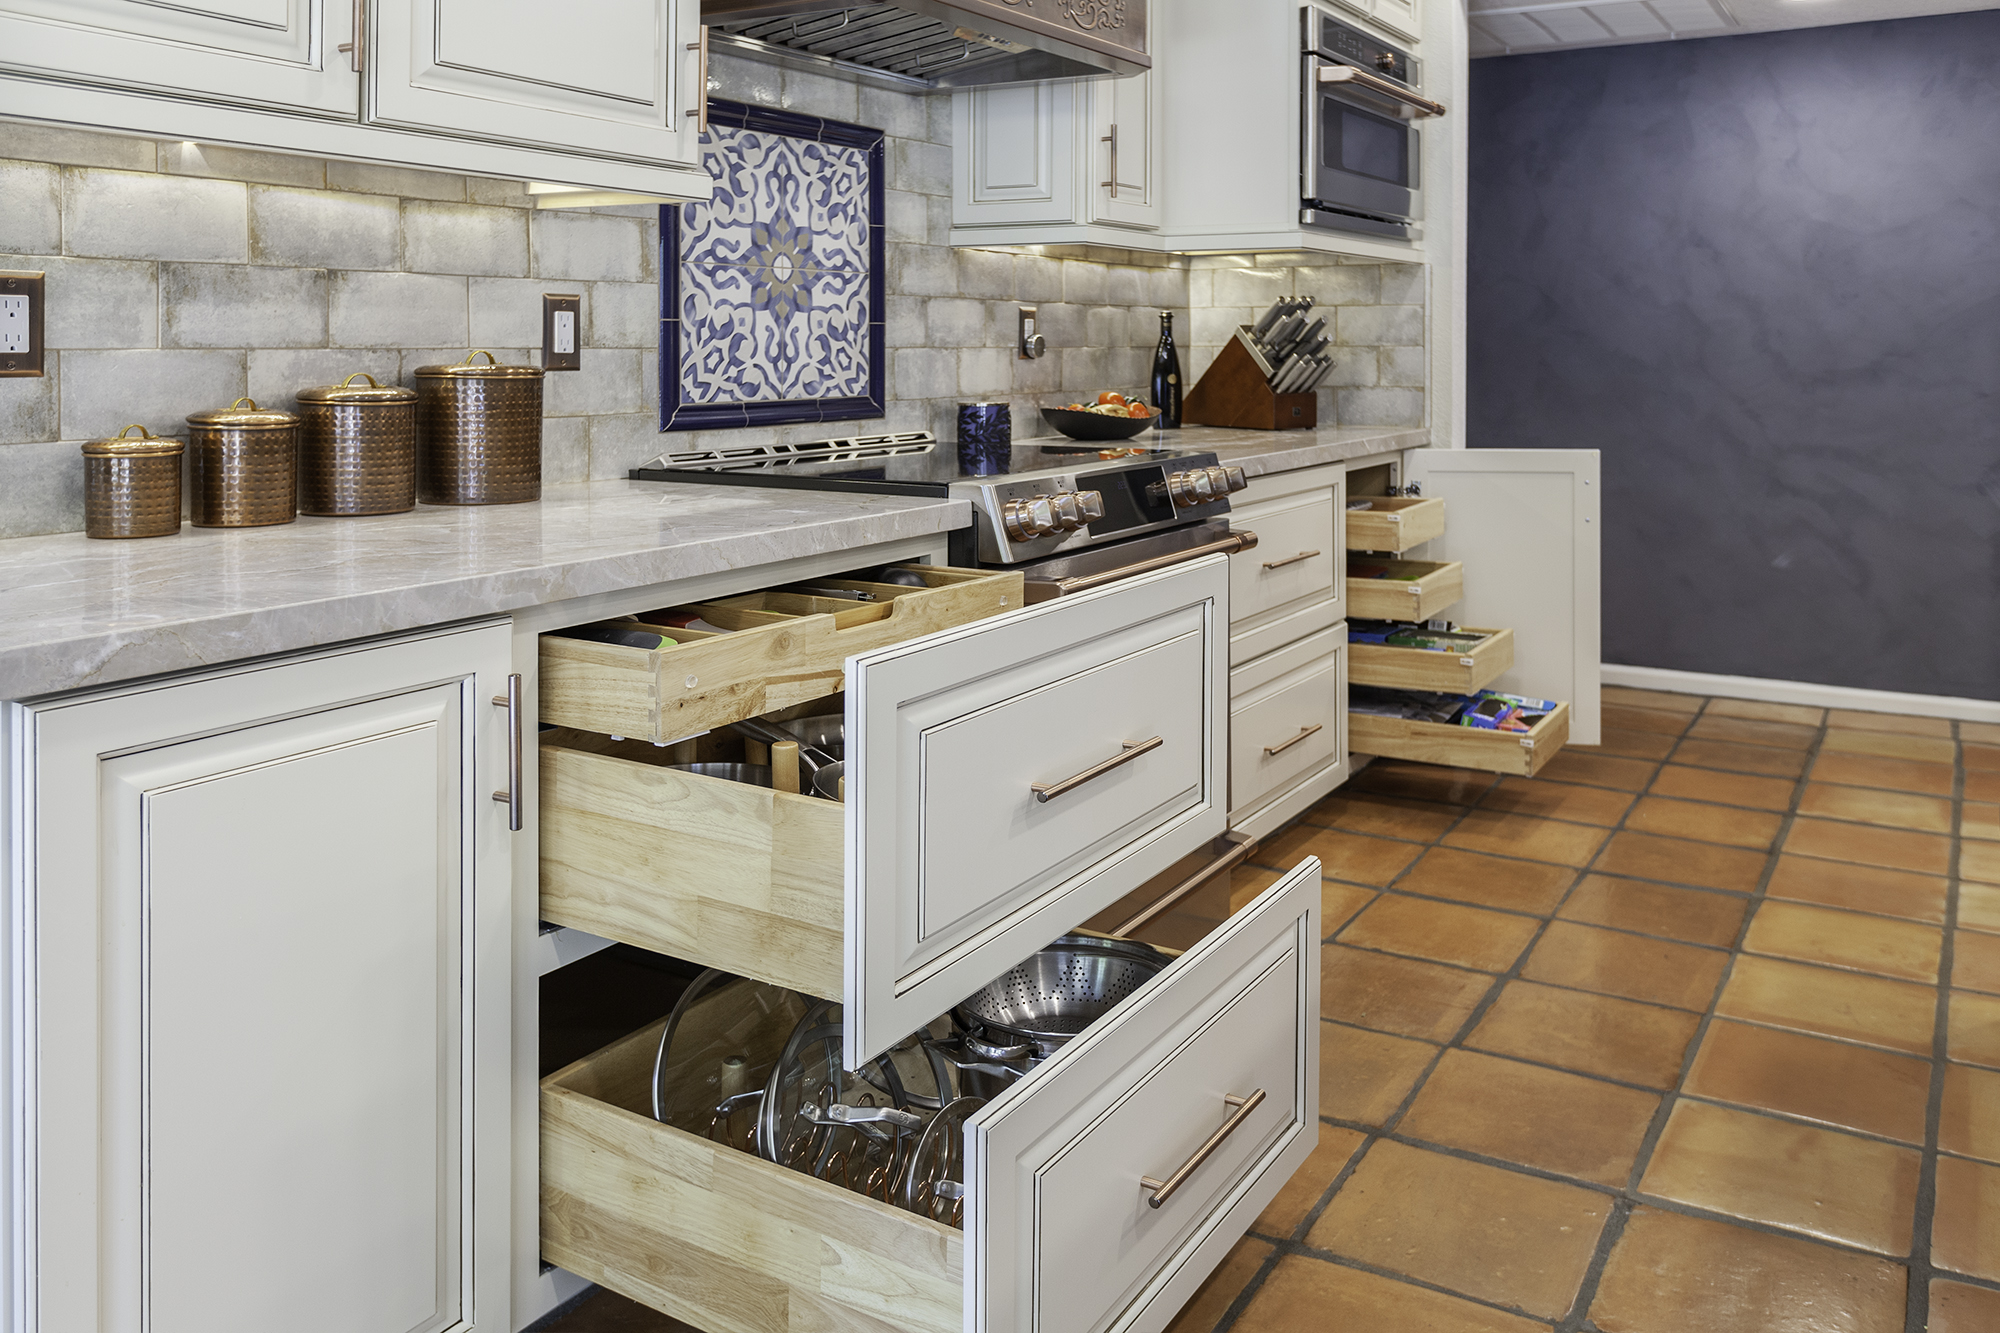 Declutter Throughout Your Home with Cabinet Organization - Dura Supreme  Cabinetry